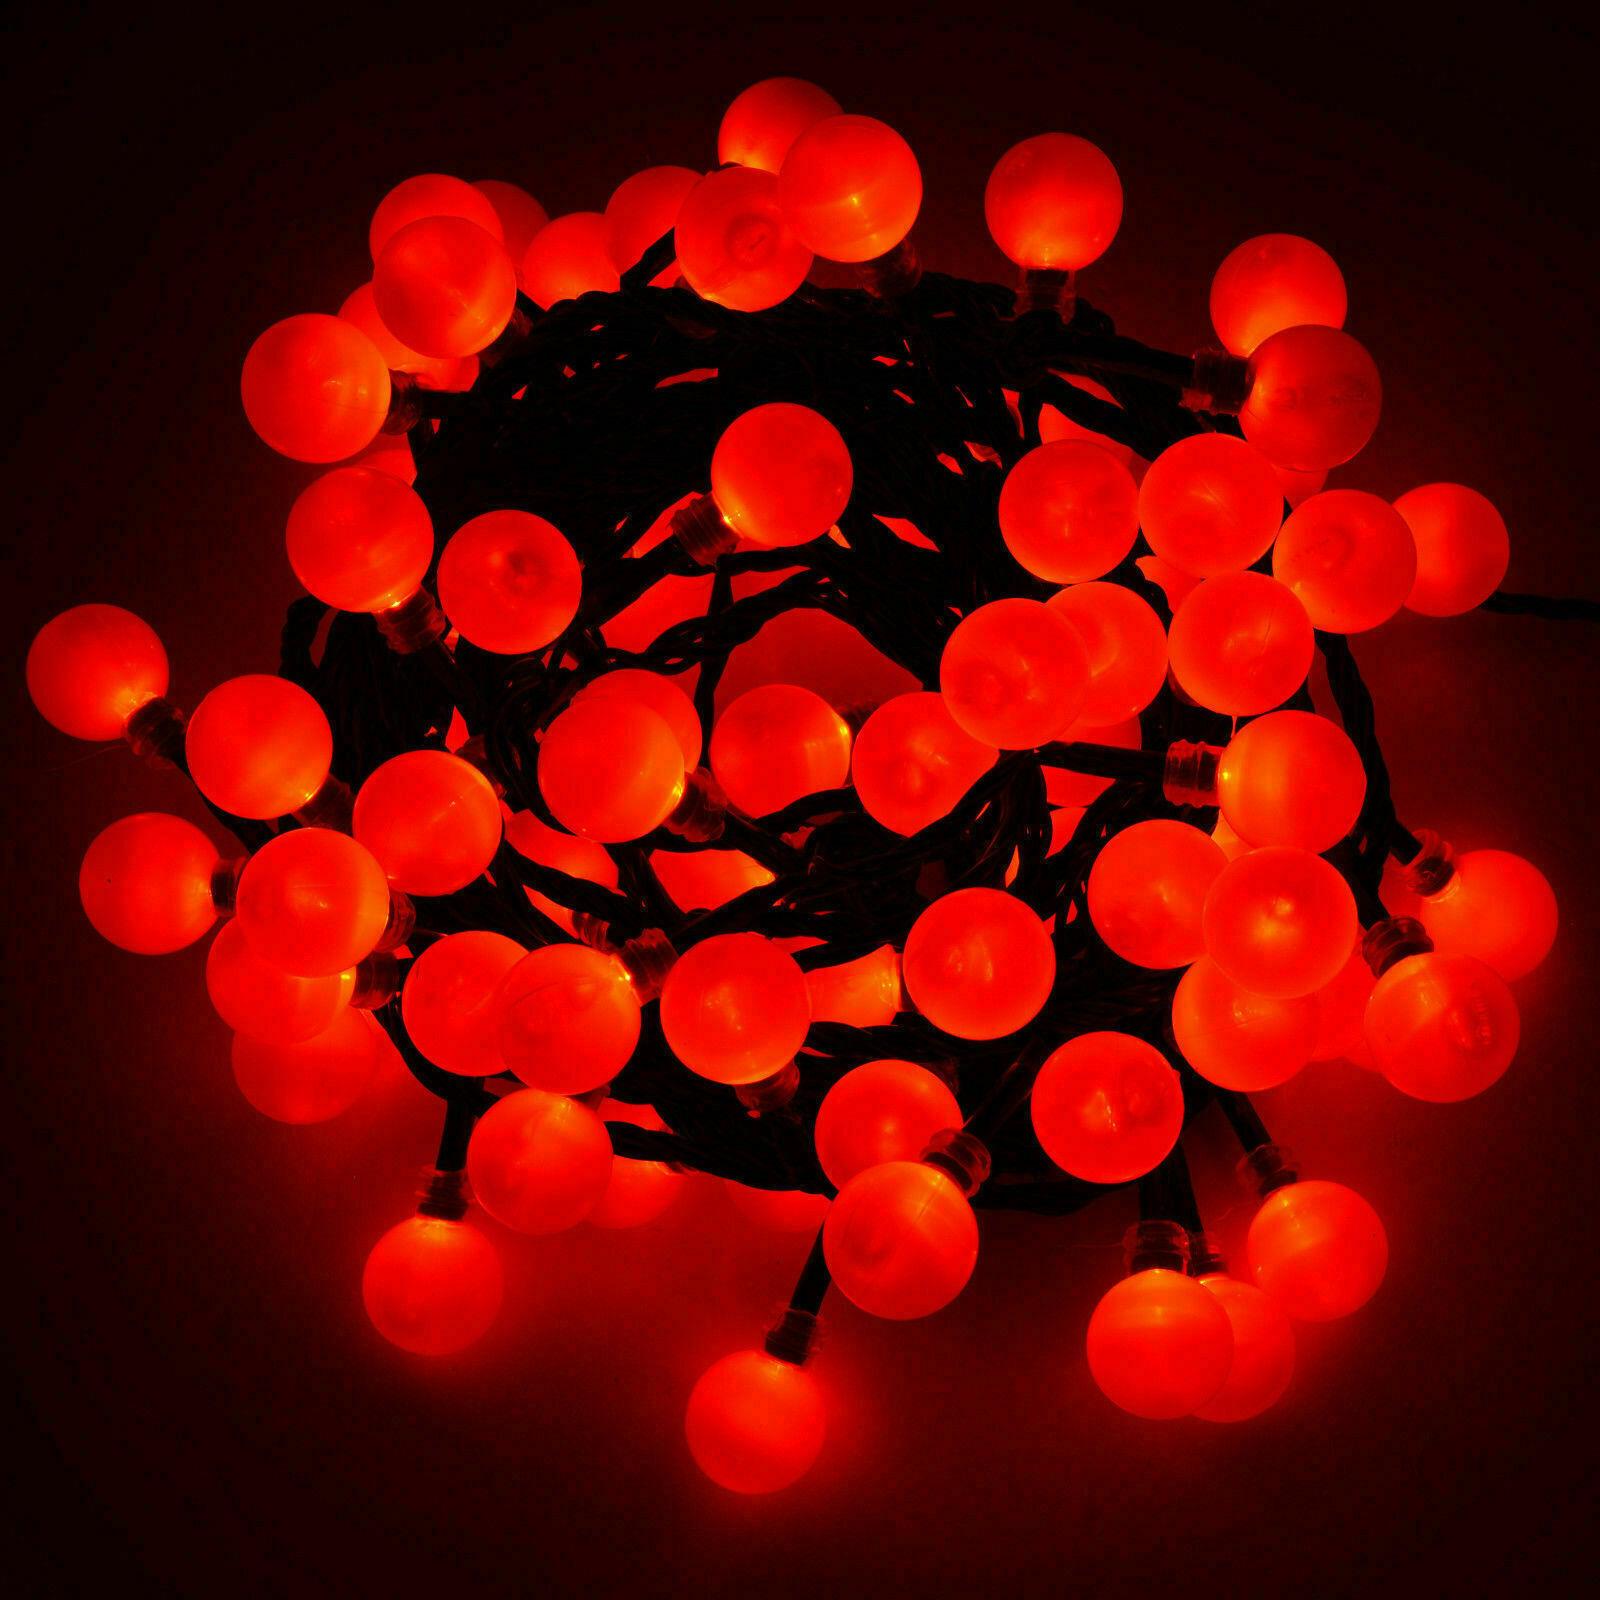 200 Berry Christmas LED Lights Red by Geezy - UKBuyZone